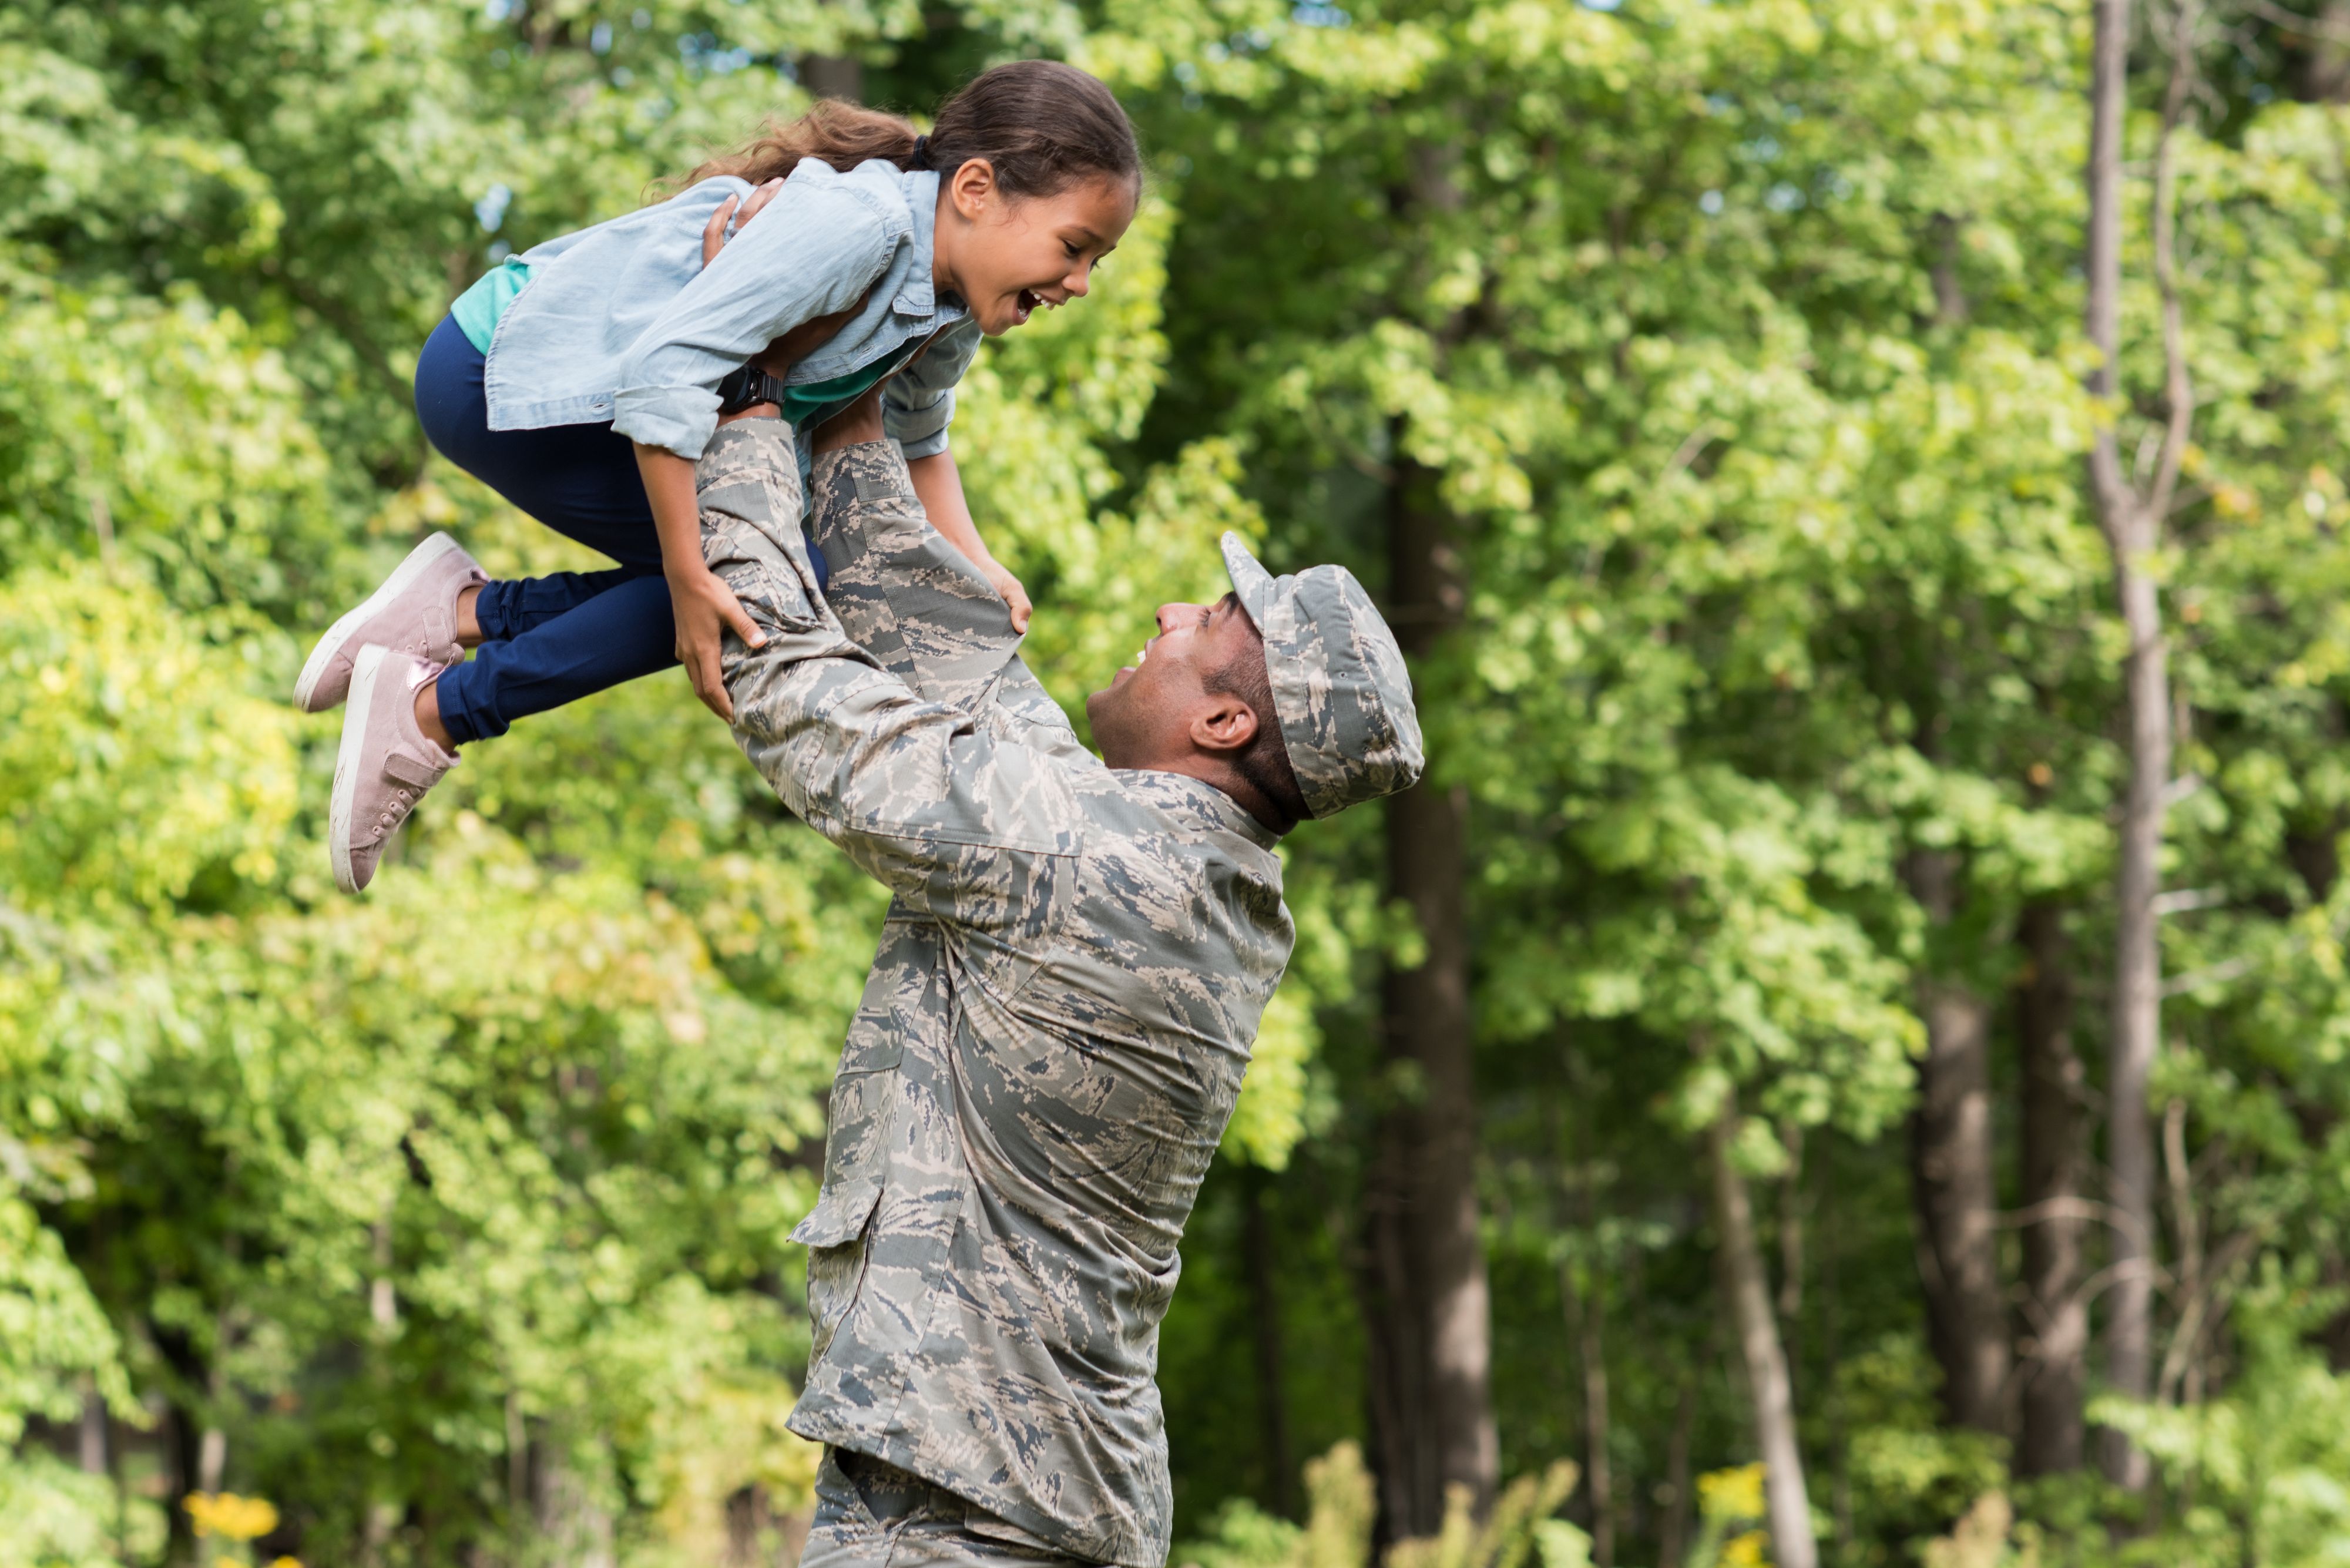 Soldier lifts daughter into air in outdoor lifestyle